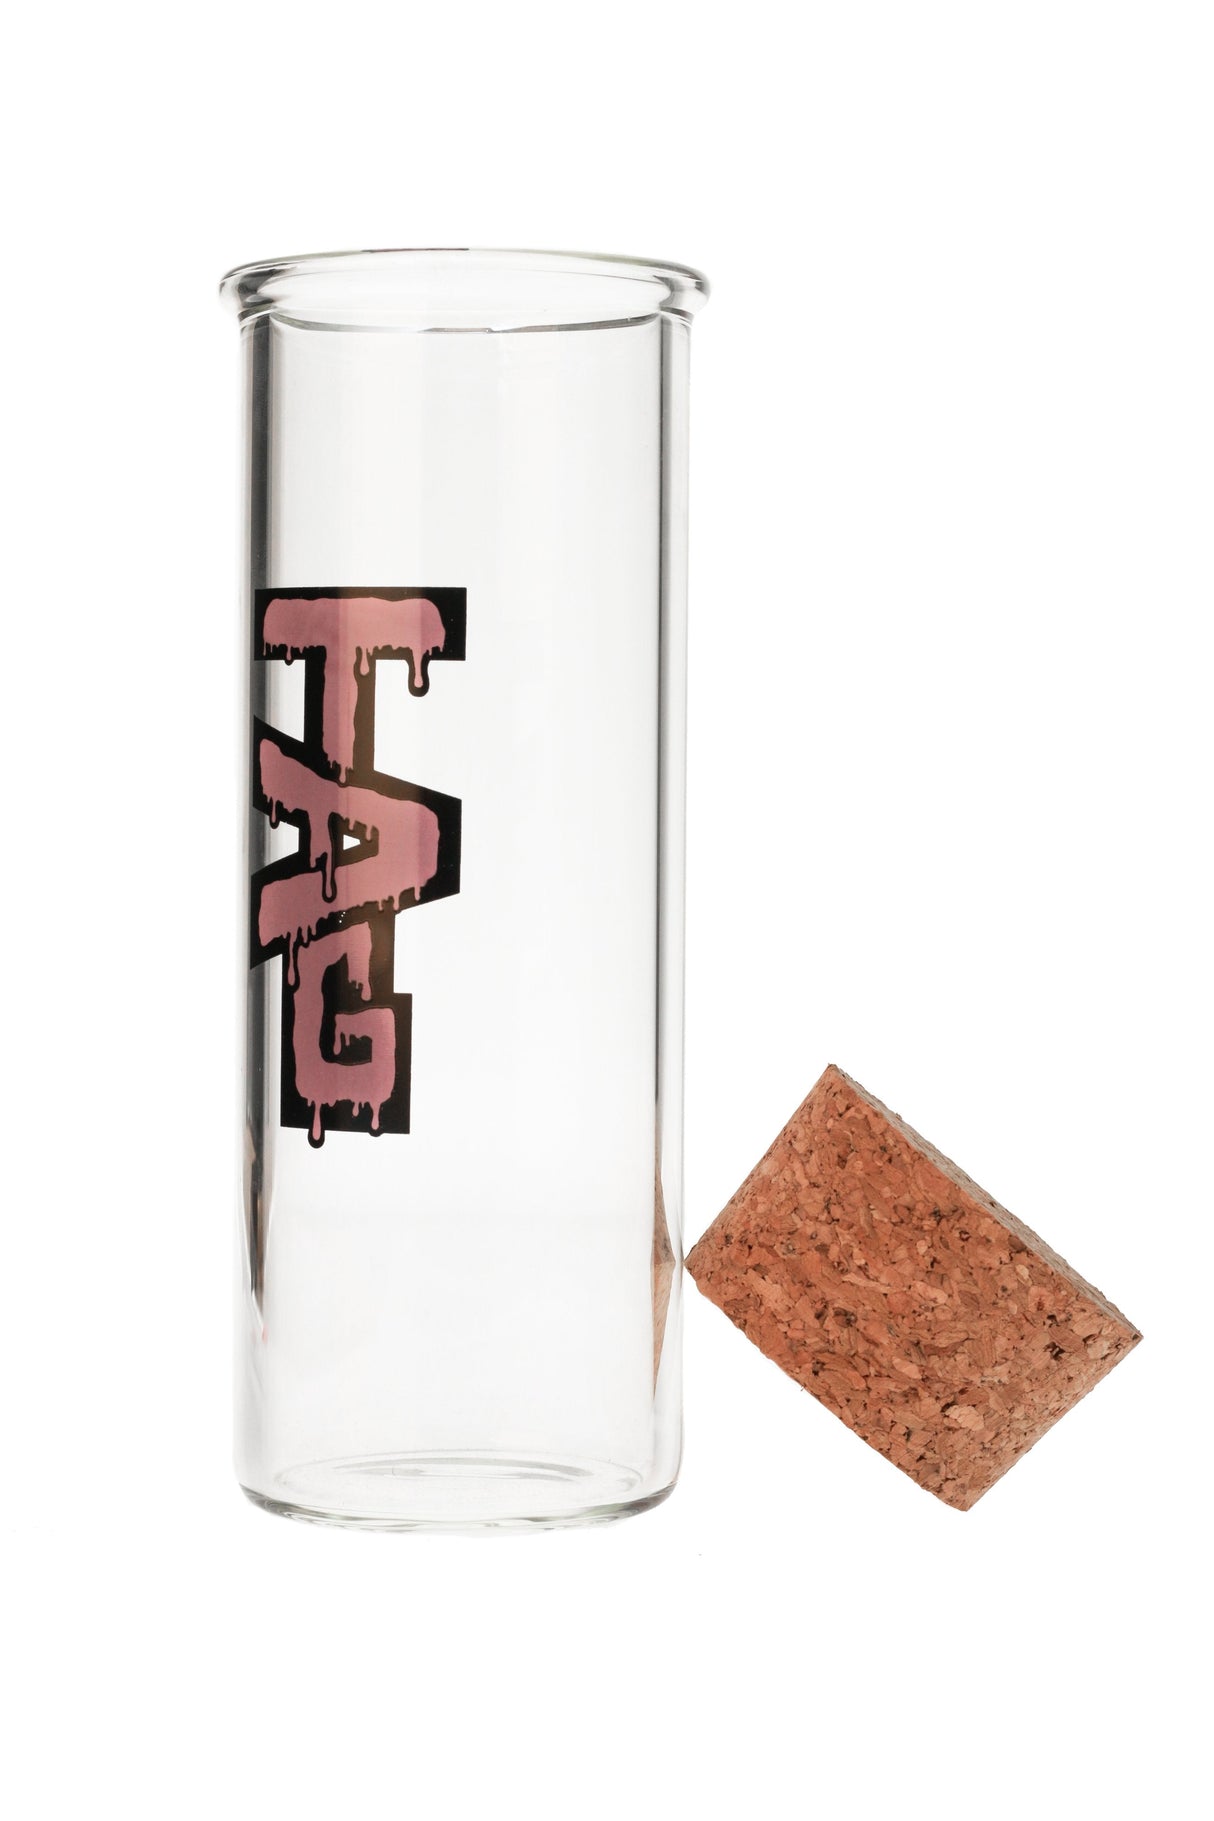 TAG - 8" Clear Glass Jar with Cork Top, 75x5MM, Front View with TAG Logo